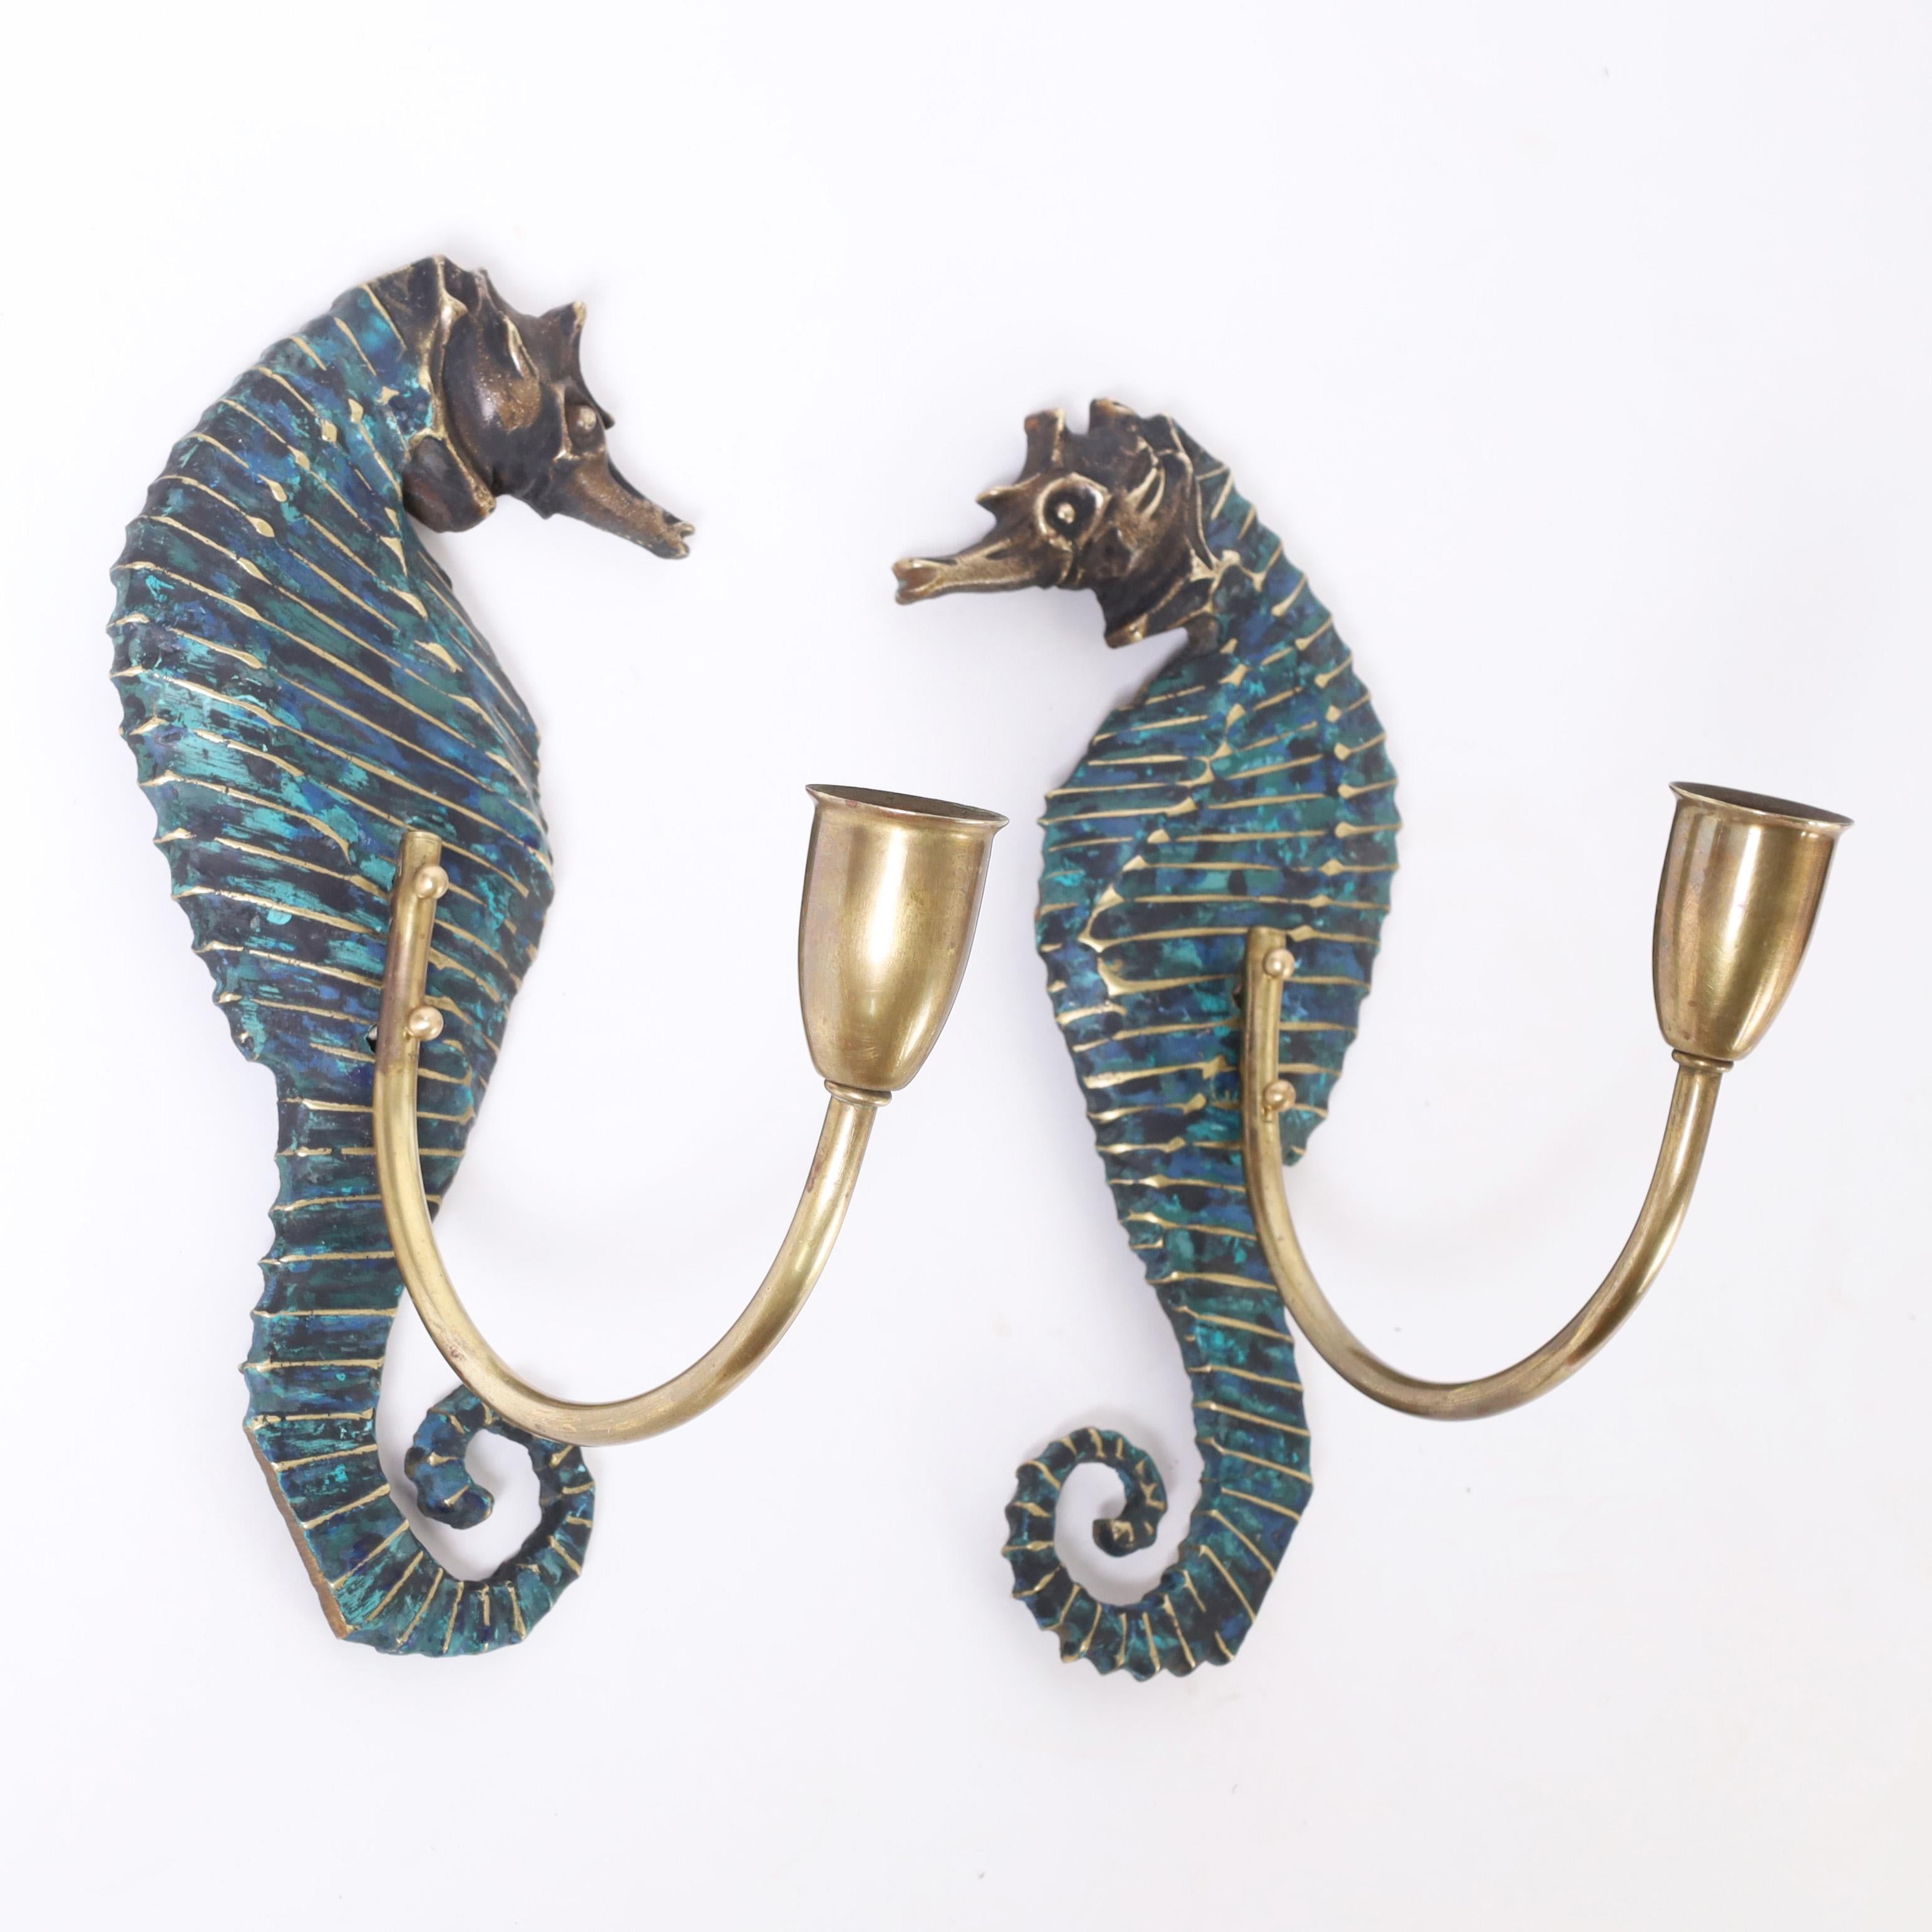 Vintage pair of seahorse wall sconces cast in bronze in a stylized modern form, painted in an alluring blue with brass arms. Signed Mendoza Mexico on the back. 